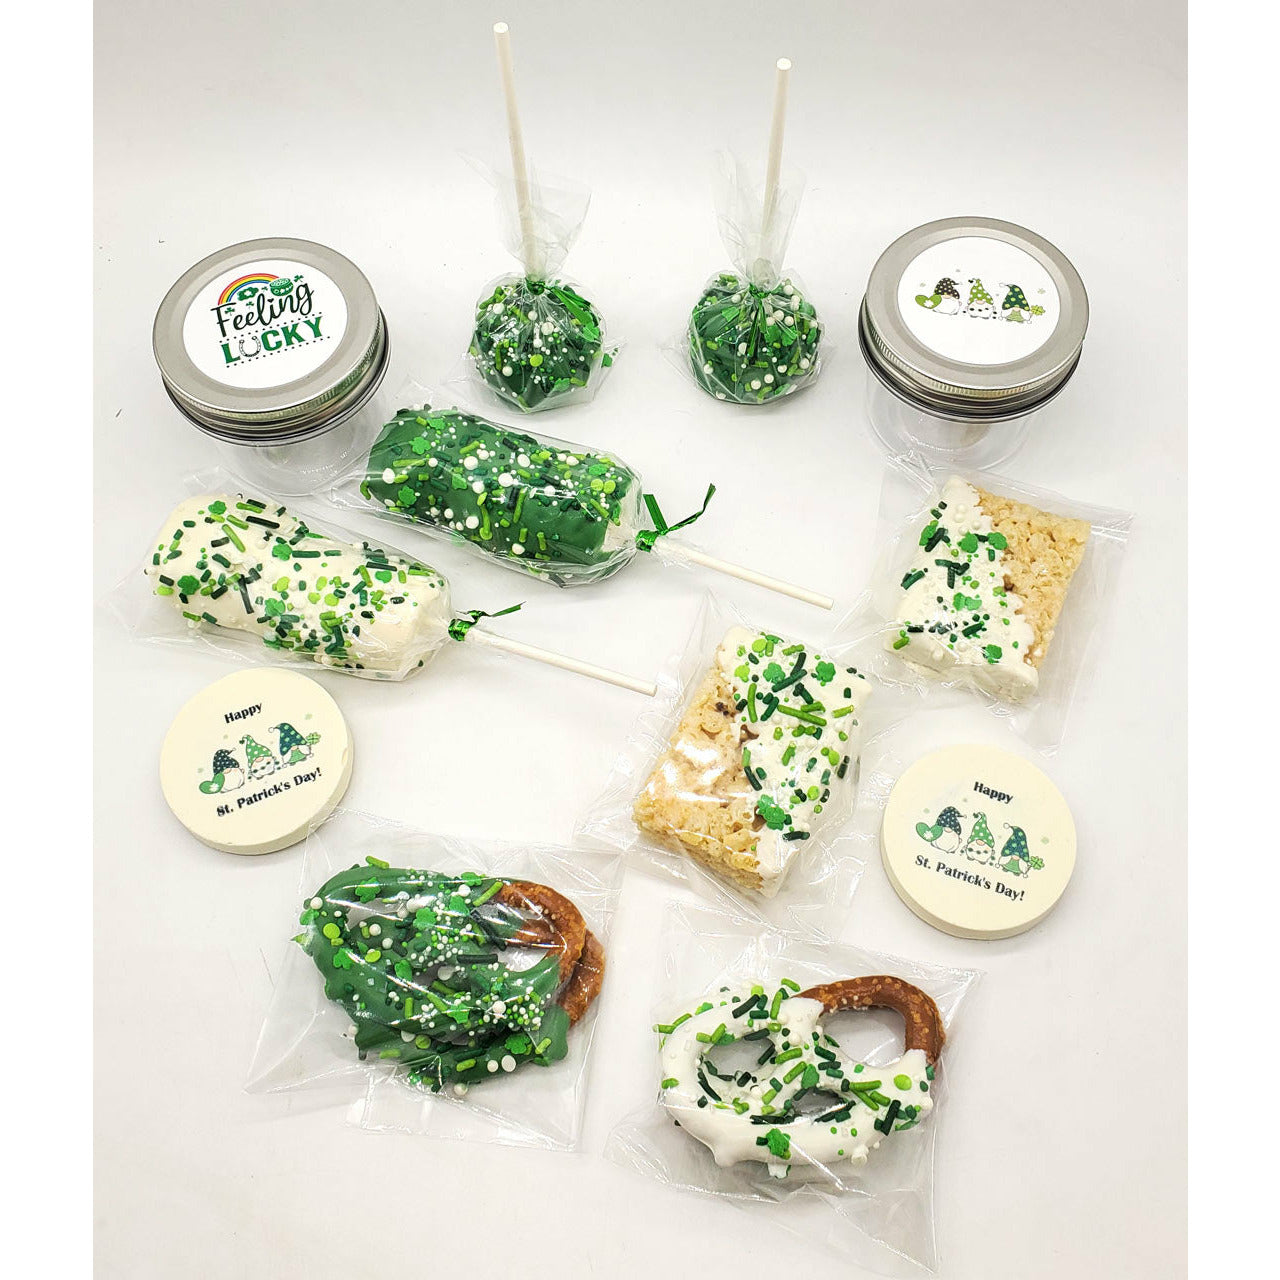 st. Patrick's day bakery delivered phoenix